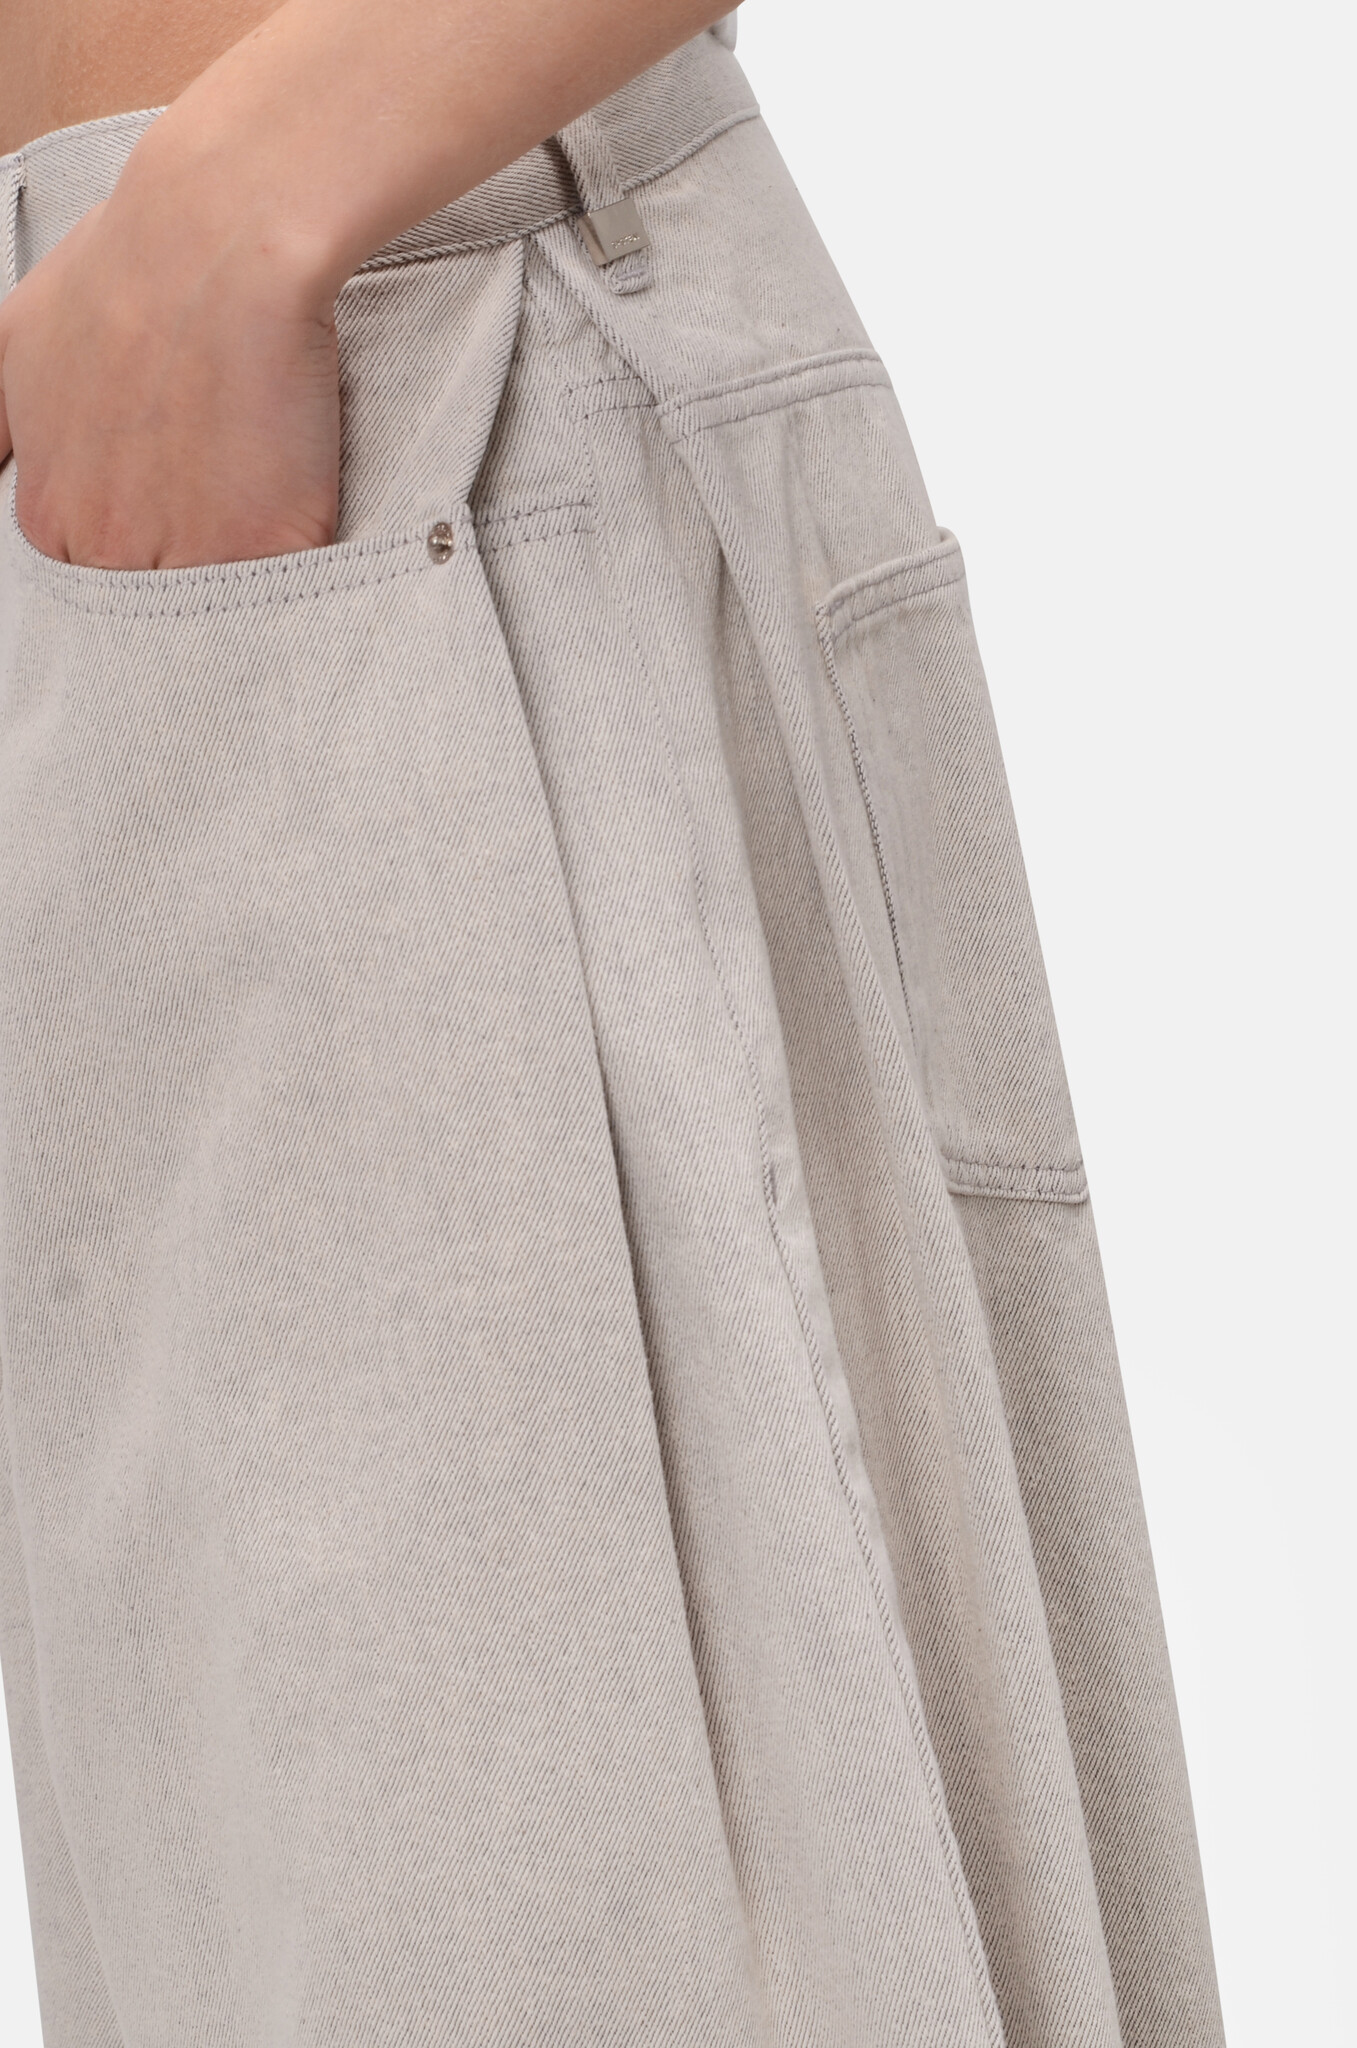 Double Tucked Jeans in Light Grey-5